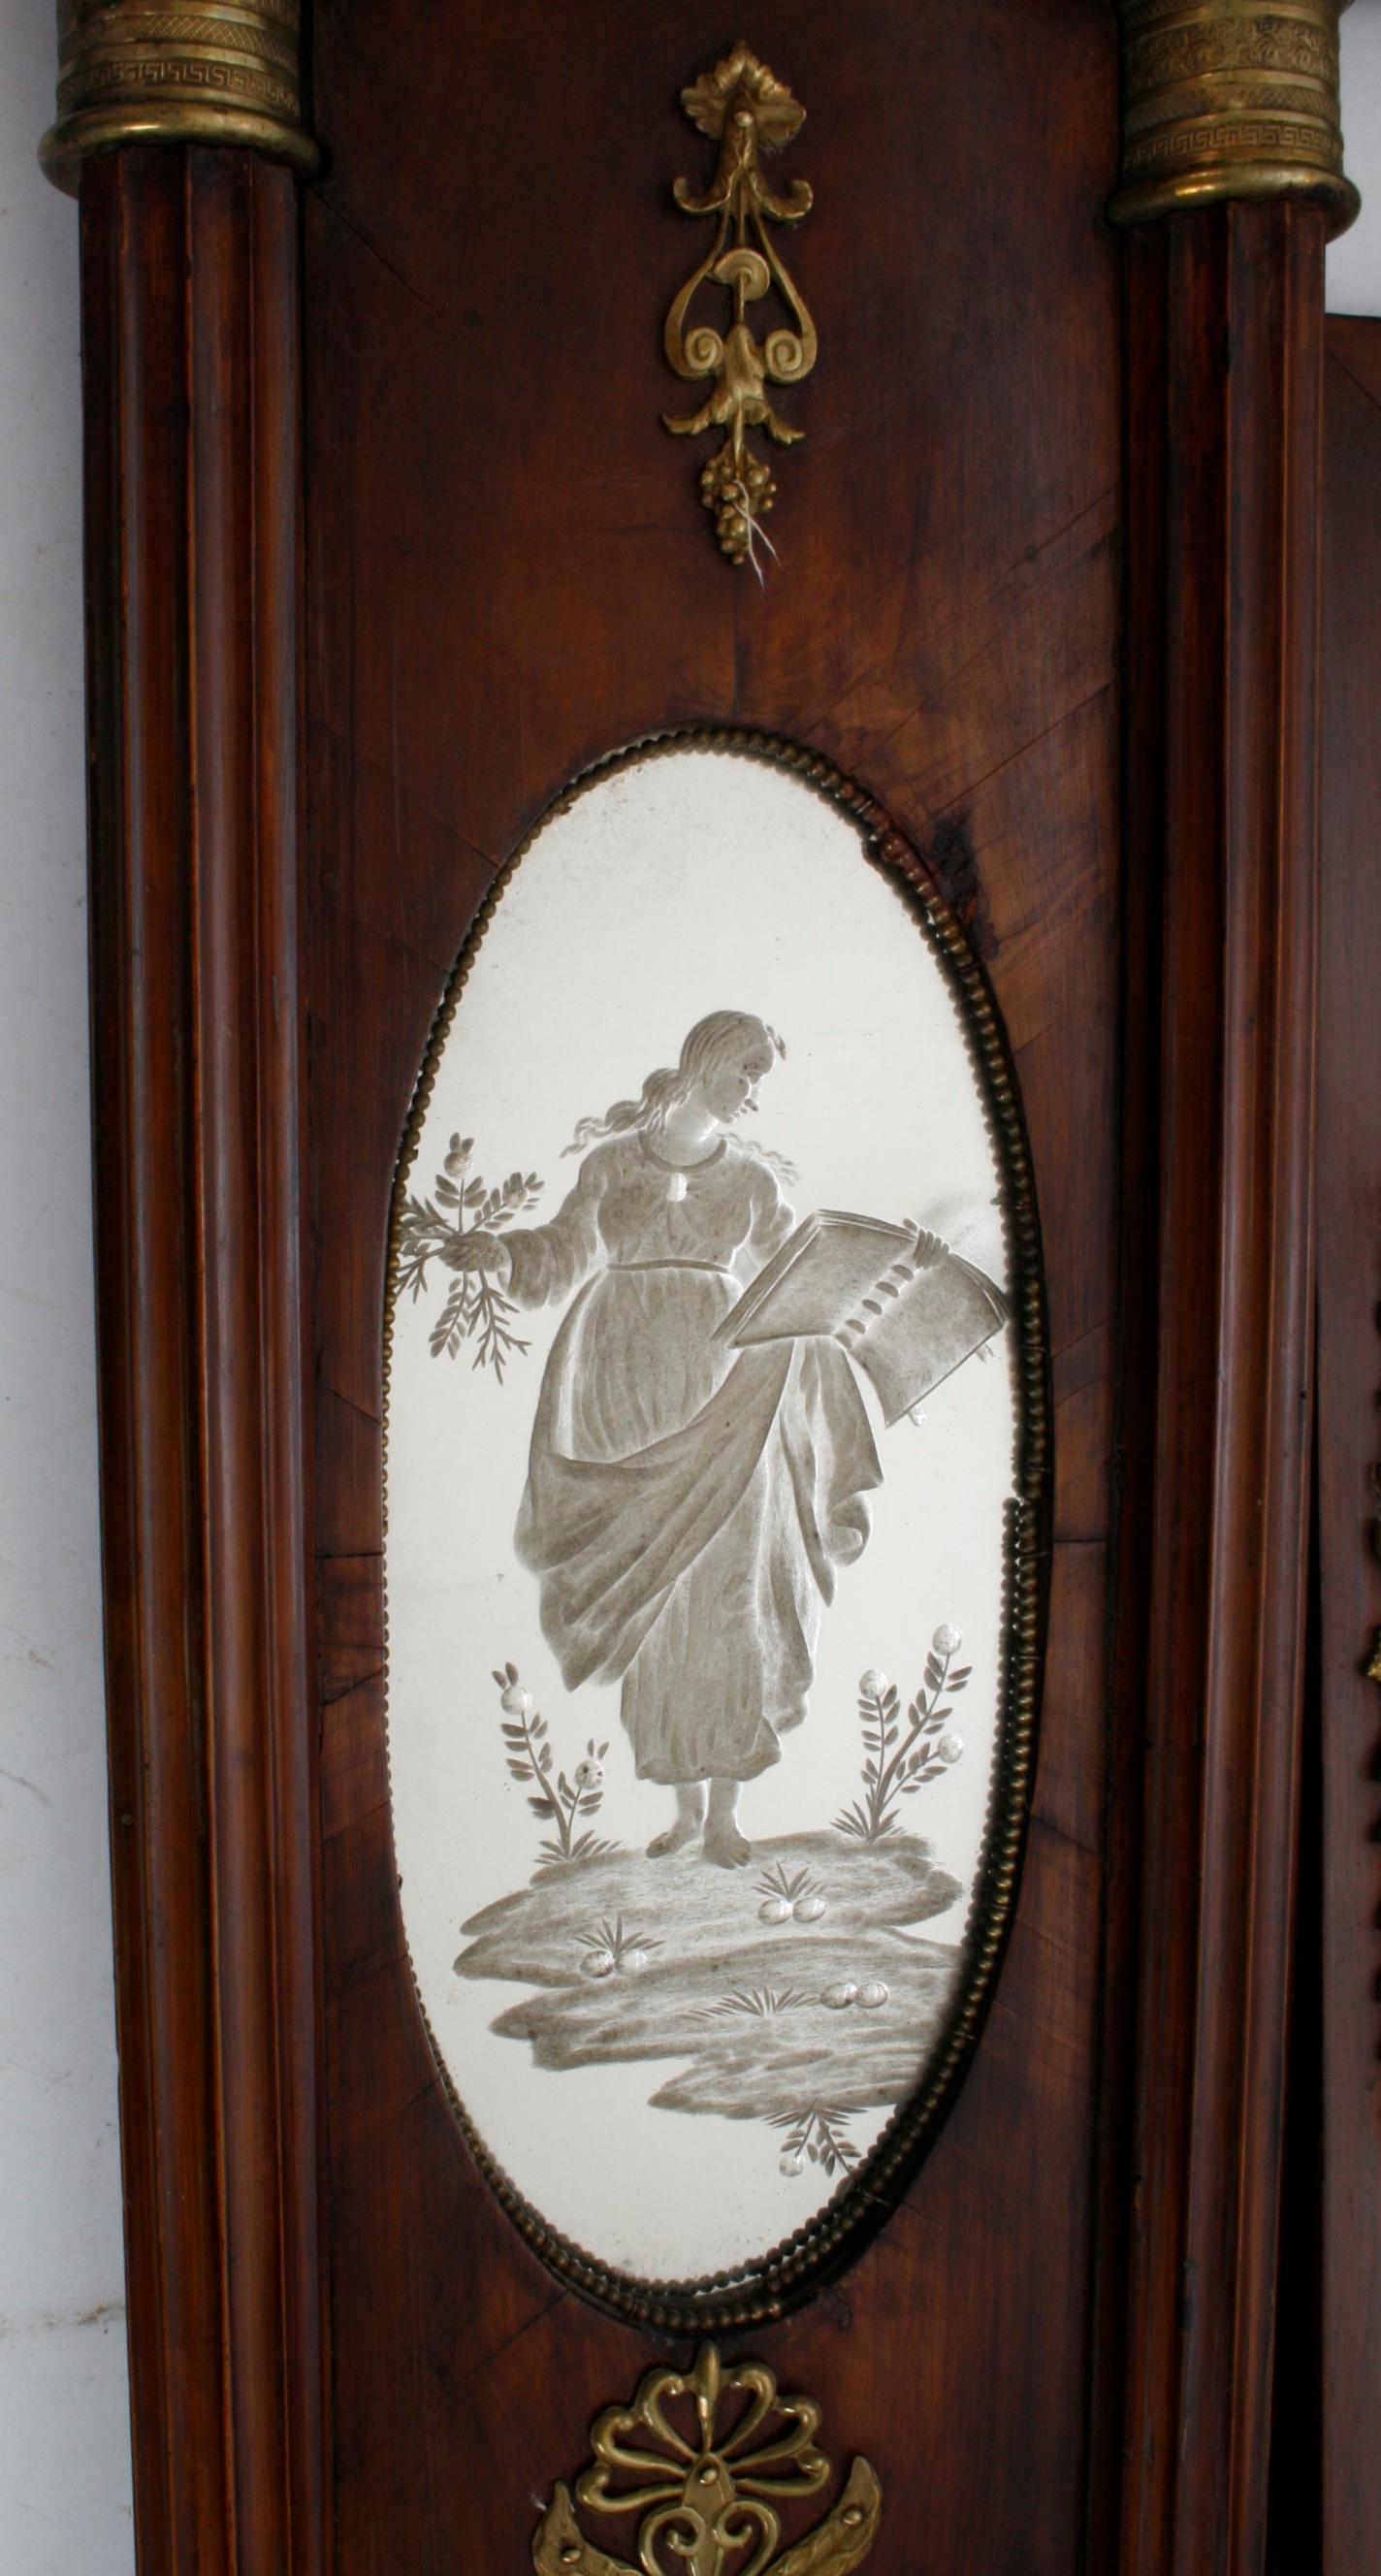 French Empire Vanity Mirror with Original Reverse Etched Glass Panels circa 1800 In Good Condition For Sale In valatie, NY